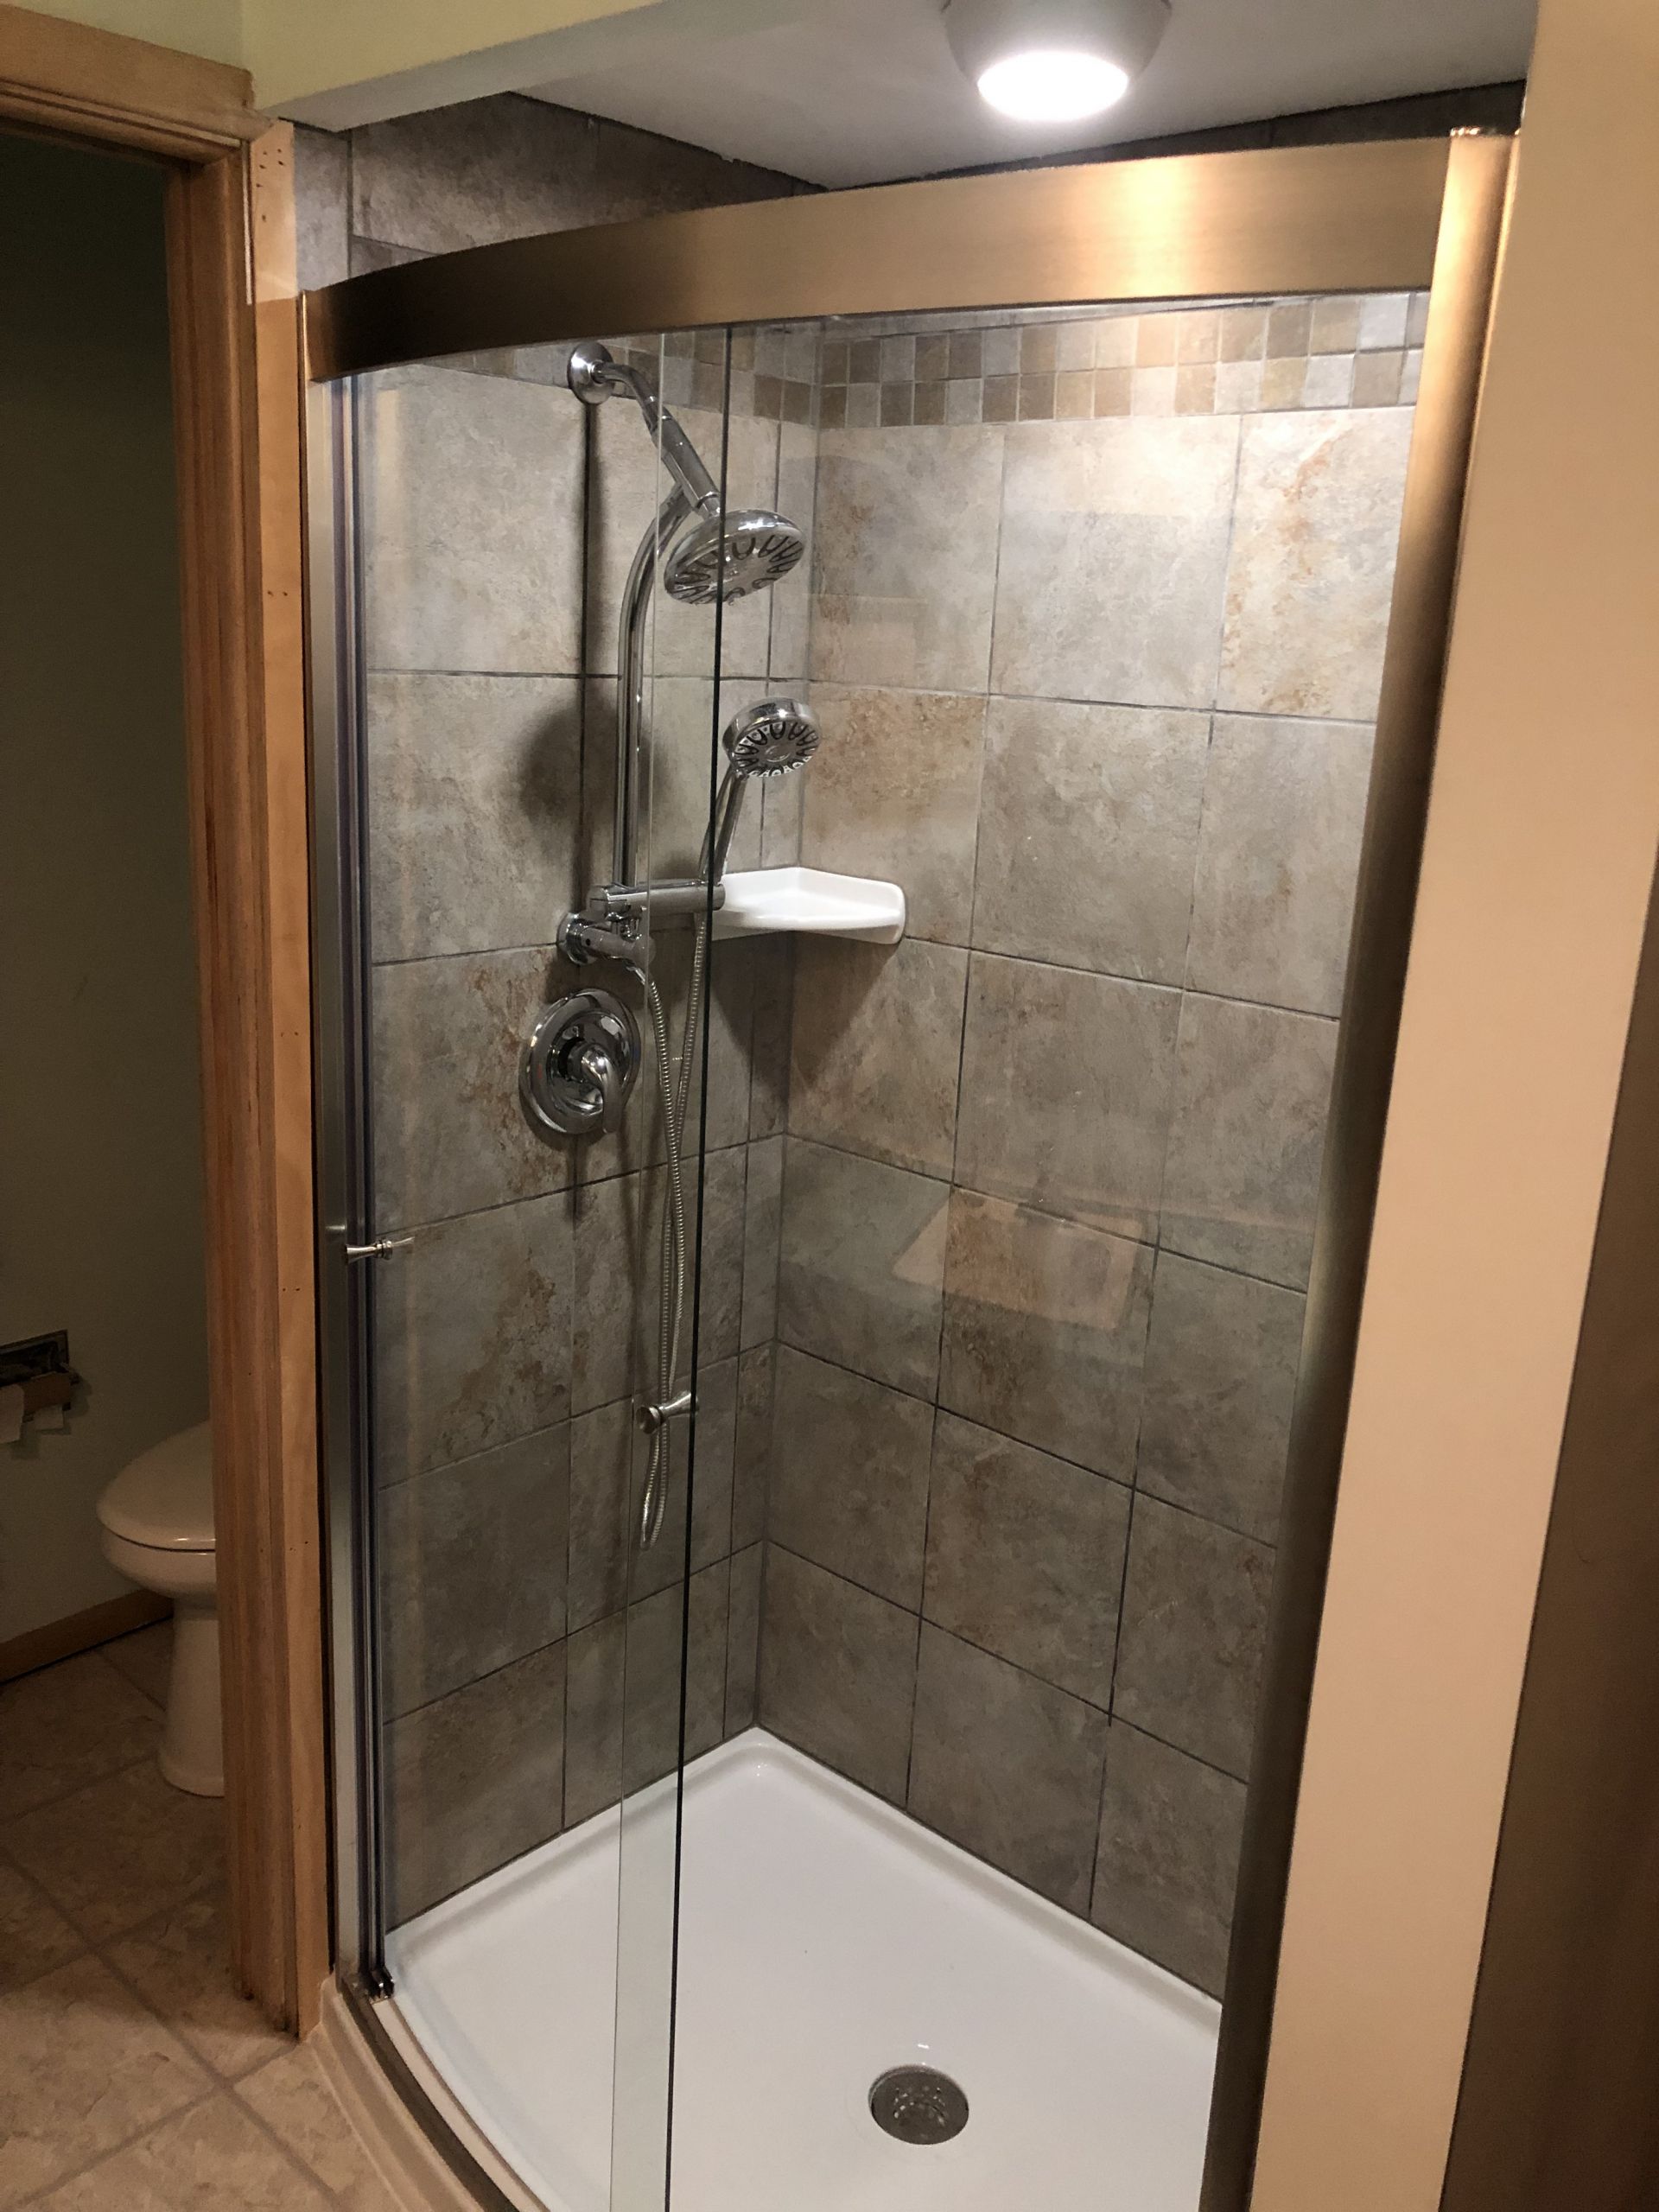 Bathroom Remodeling Cleveland Ohio
 Gorgeous Bathroom Remodeling Projects